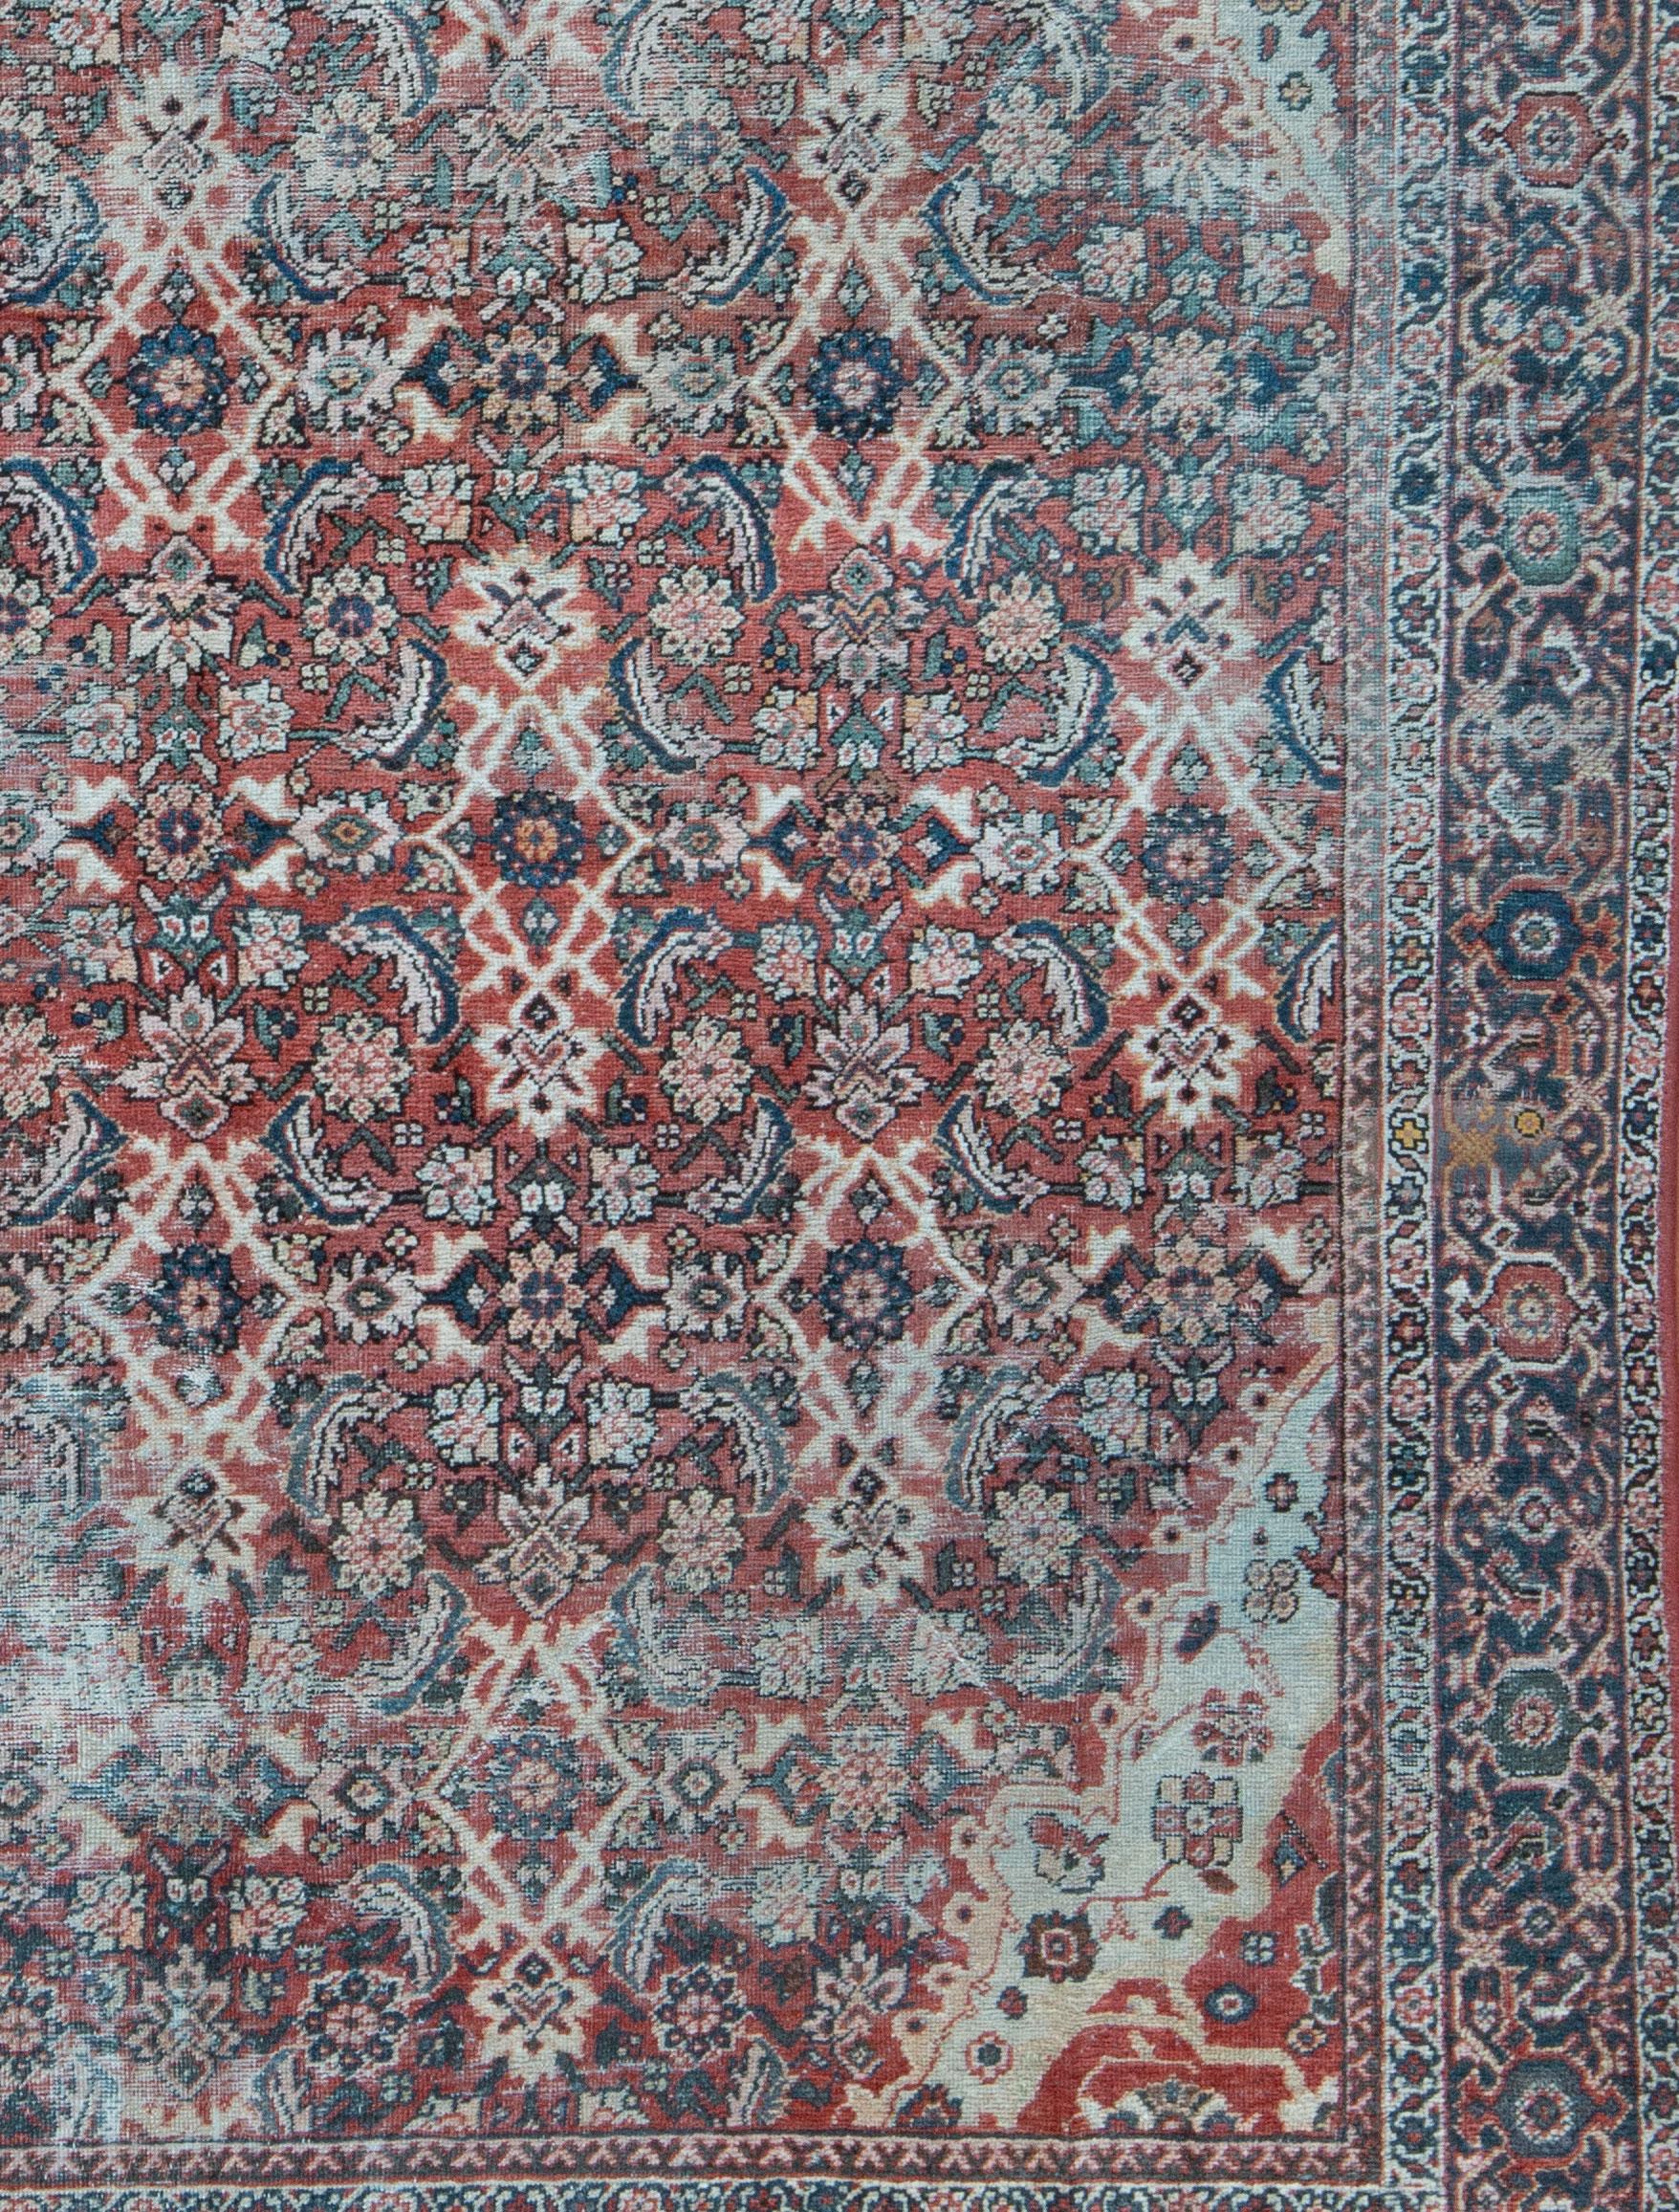 A turn of the century Persian Mahal and great example of a village weaving. A soft red field color with an all over design and corner pockets in ivory, jade green and indigo blue. A natural, worn patina and is all secured - No holes or patches and